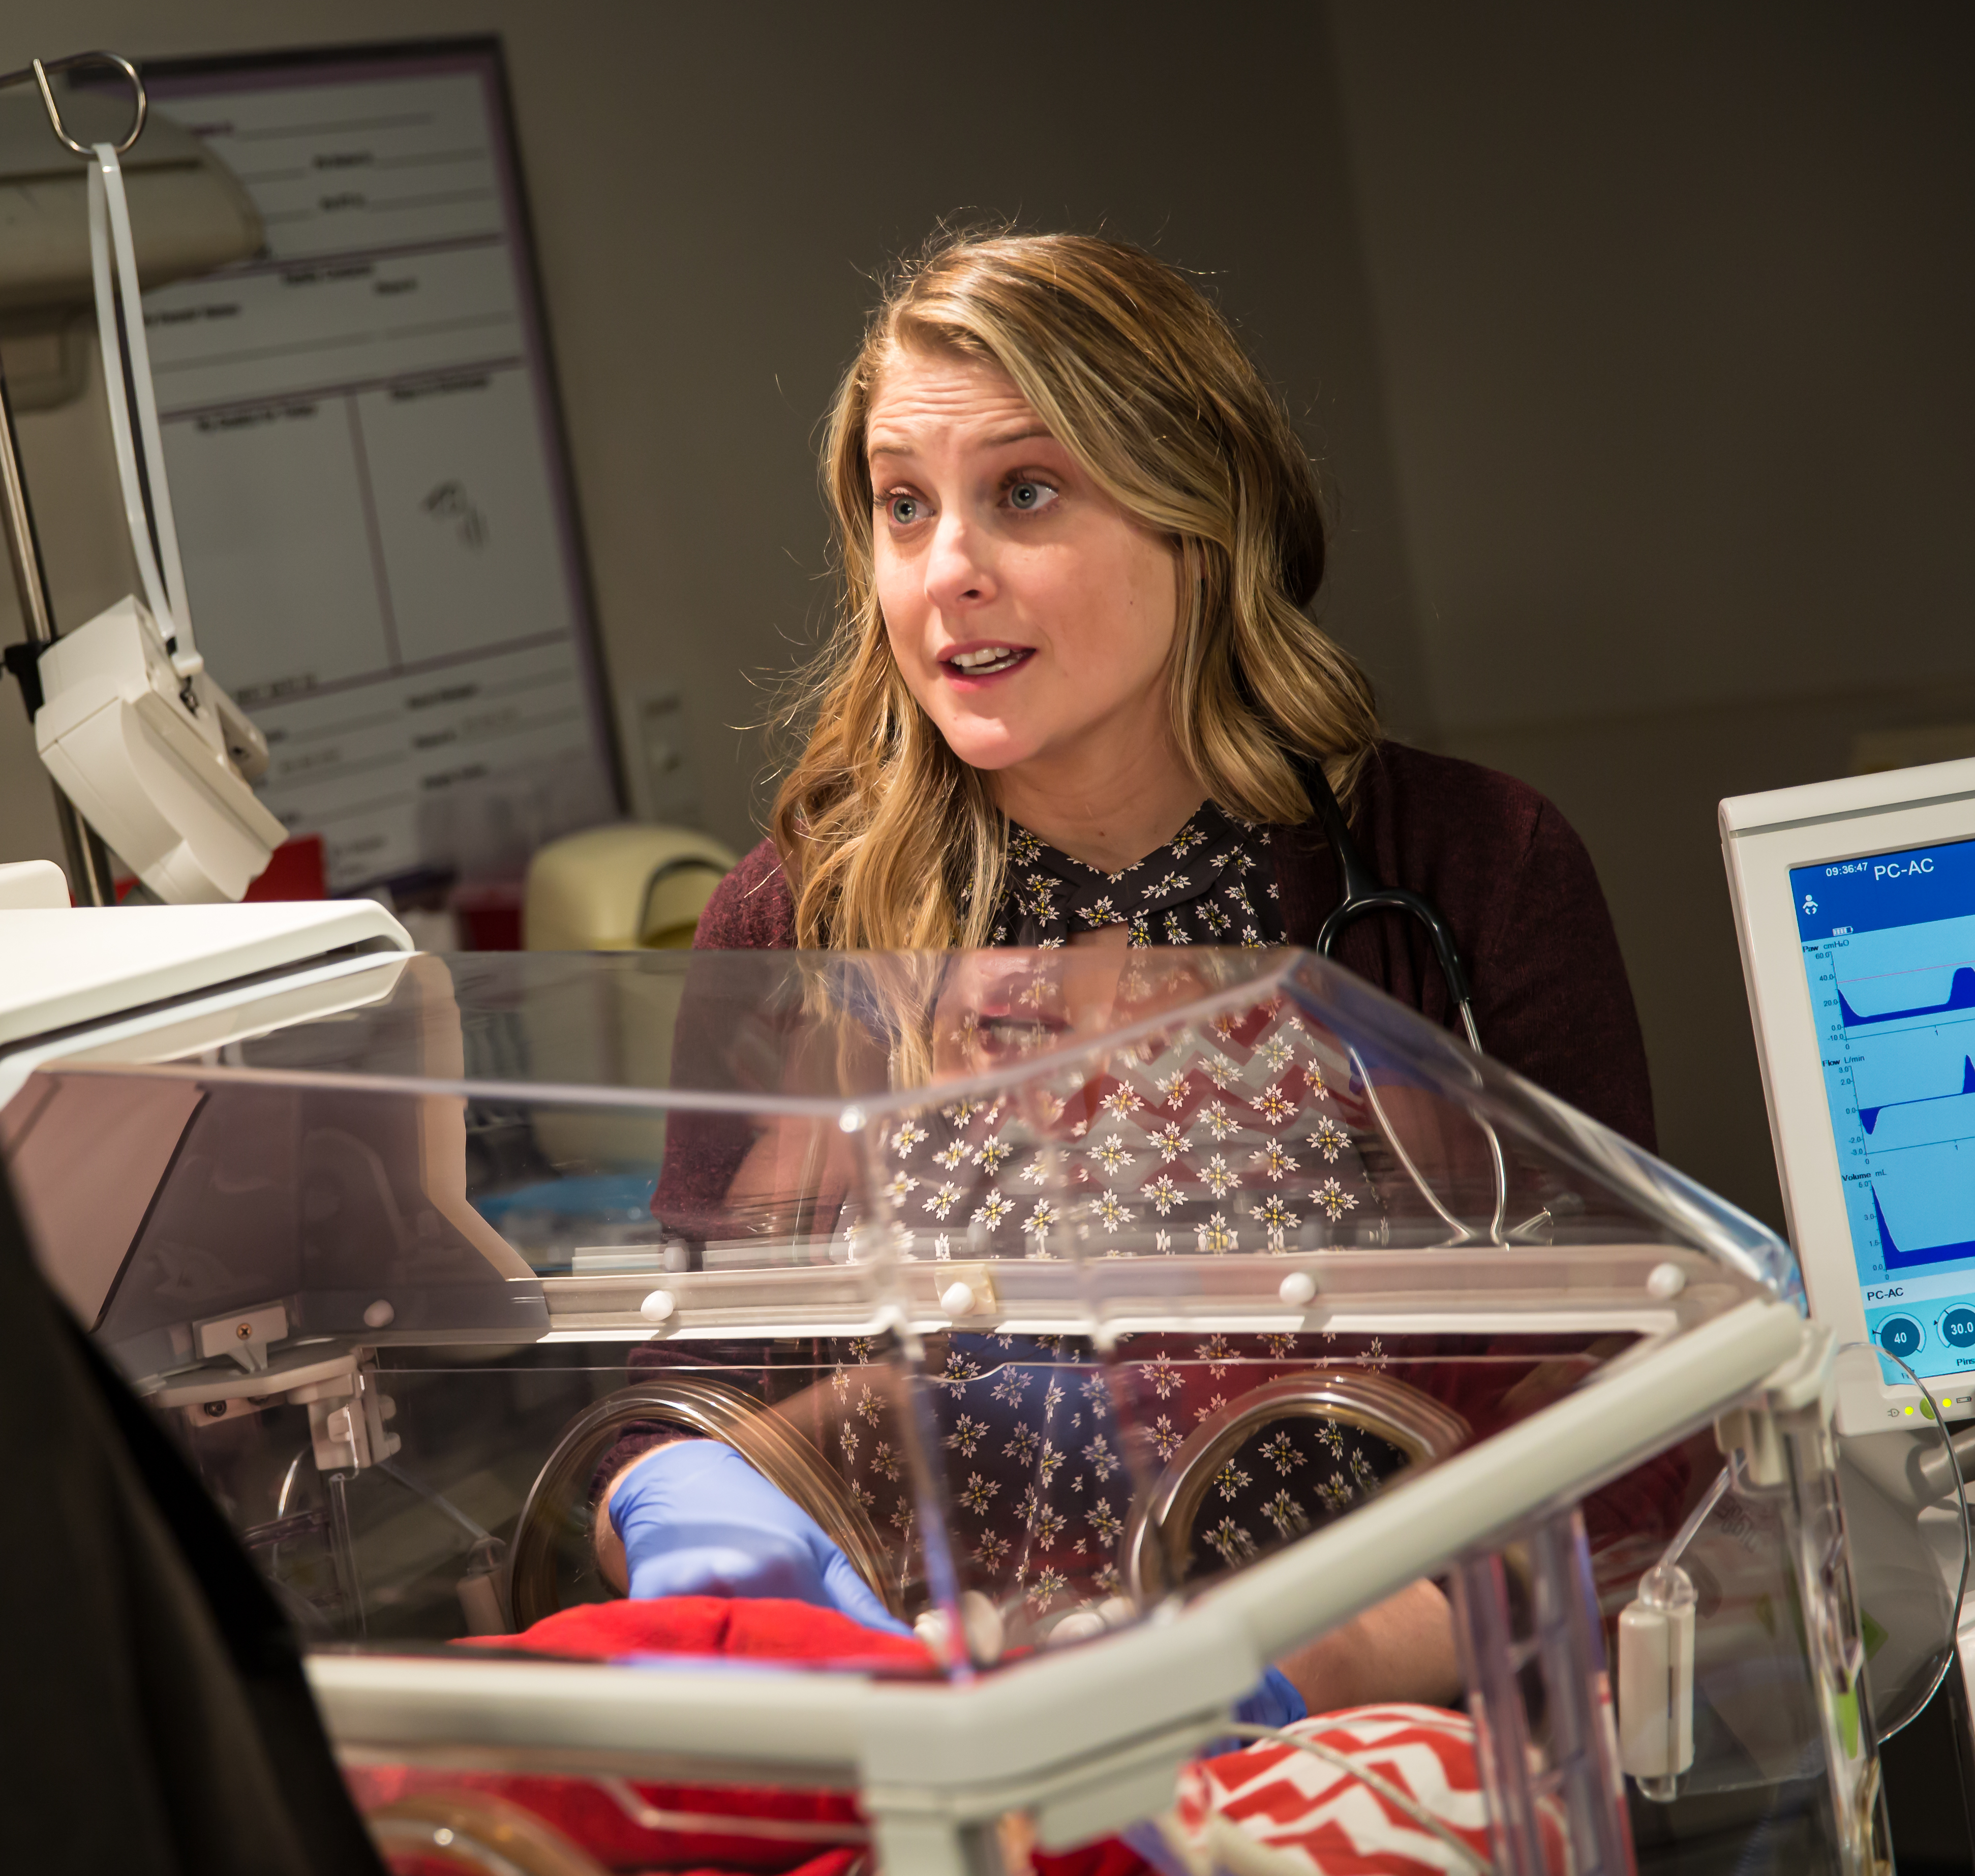 A blond woman with light skin speaks with someone out of frame in the NICU. Her hands are in an incubator. 